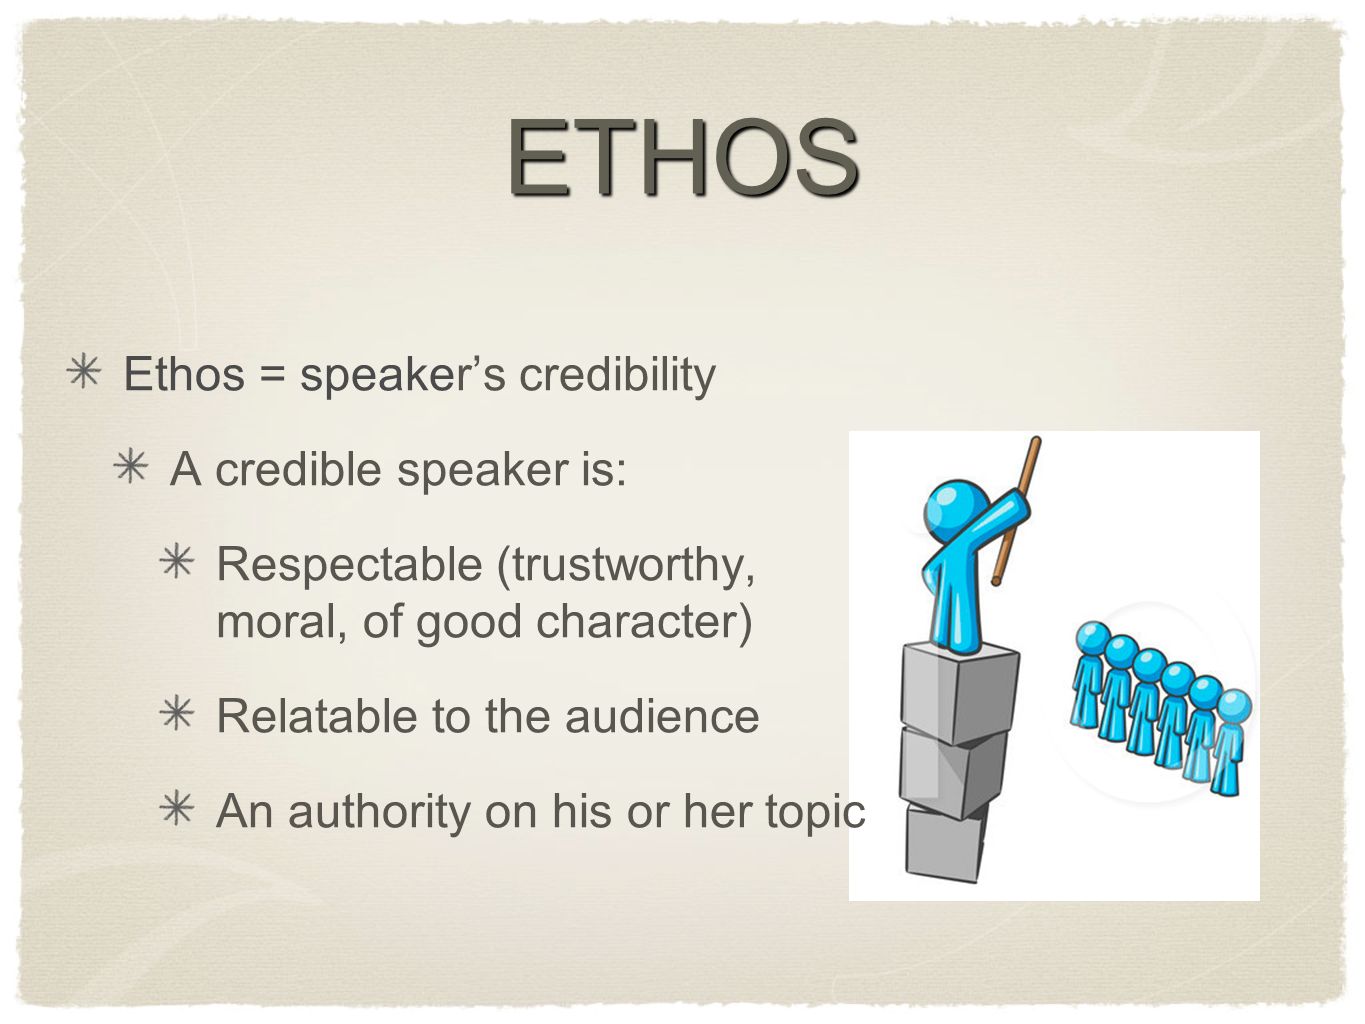 ETHOS Ethos = speaker’s credibility A credible speaker is: Respectable (trustworthy, moral, of good character) Relatable to the audience An authority on his or her topic